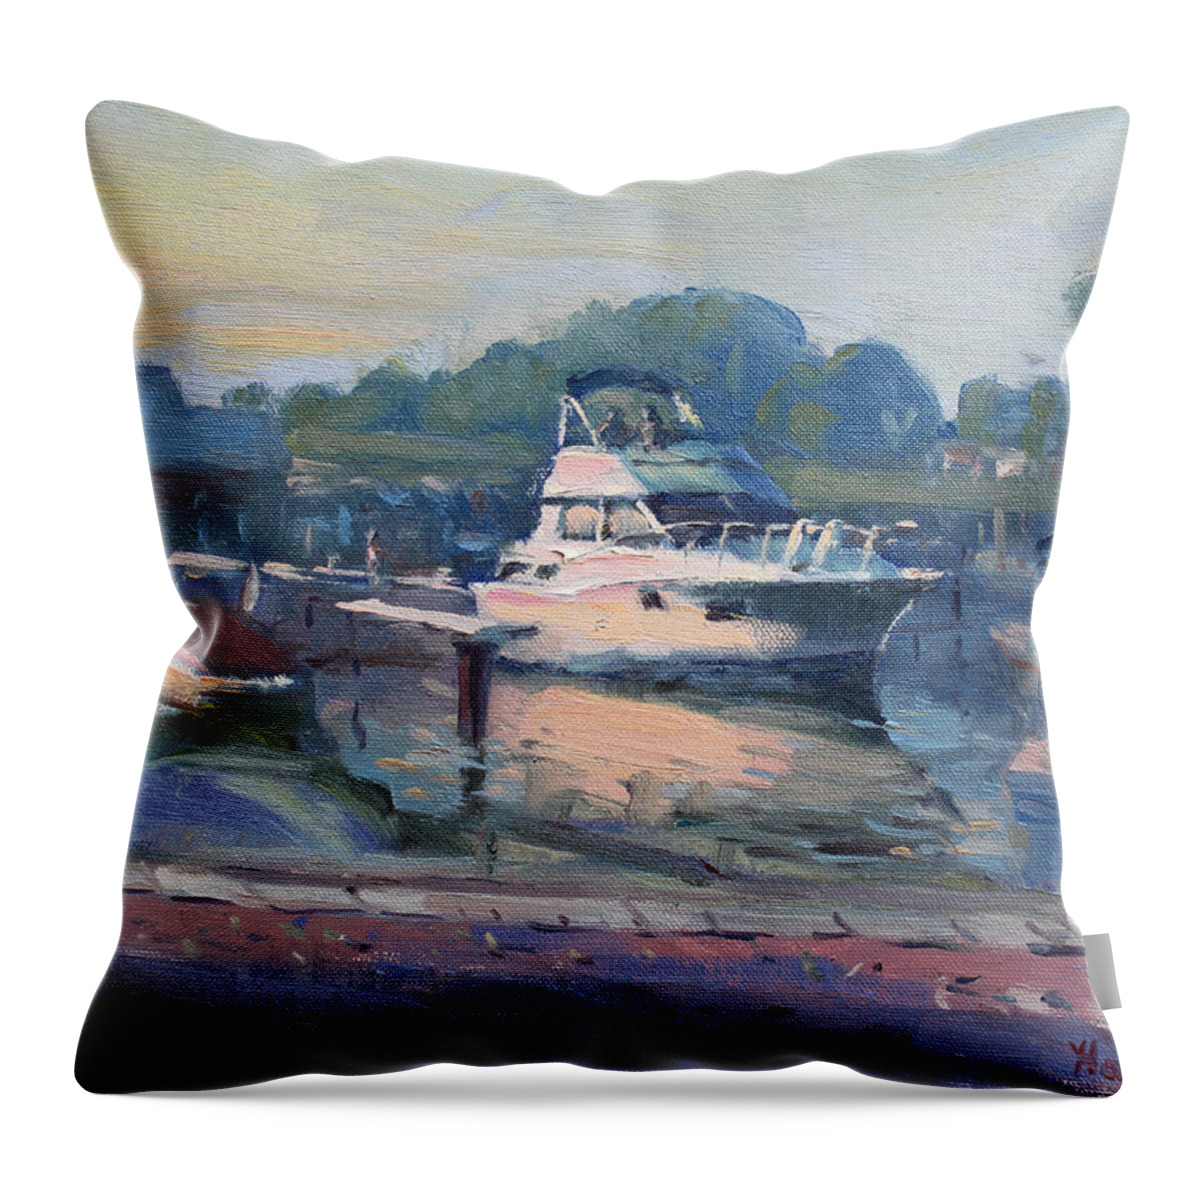 Boats Throw Pillow featuring the painting Sunset at Kellys and Jassons Boat by Ylli Haruni